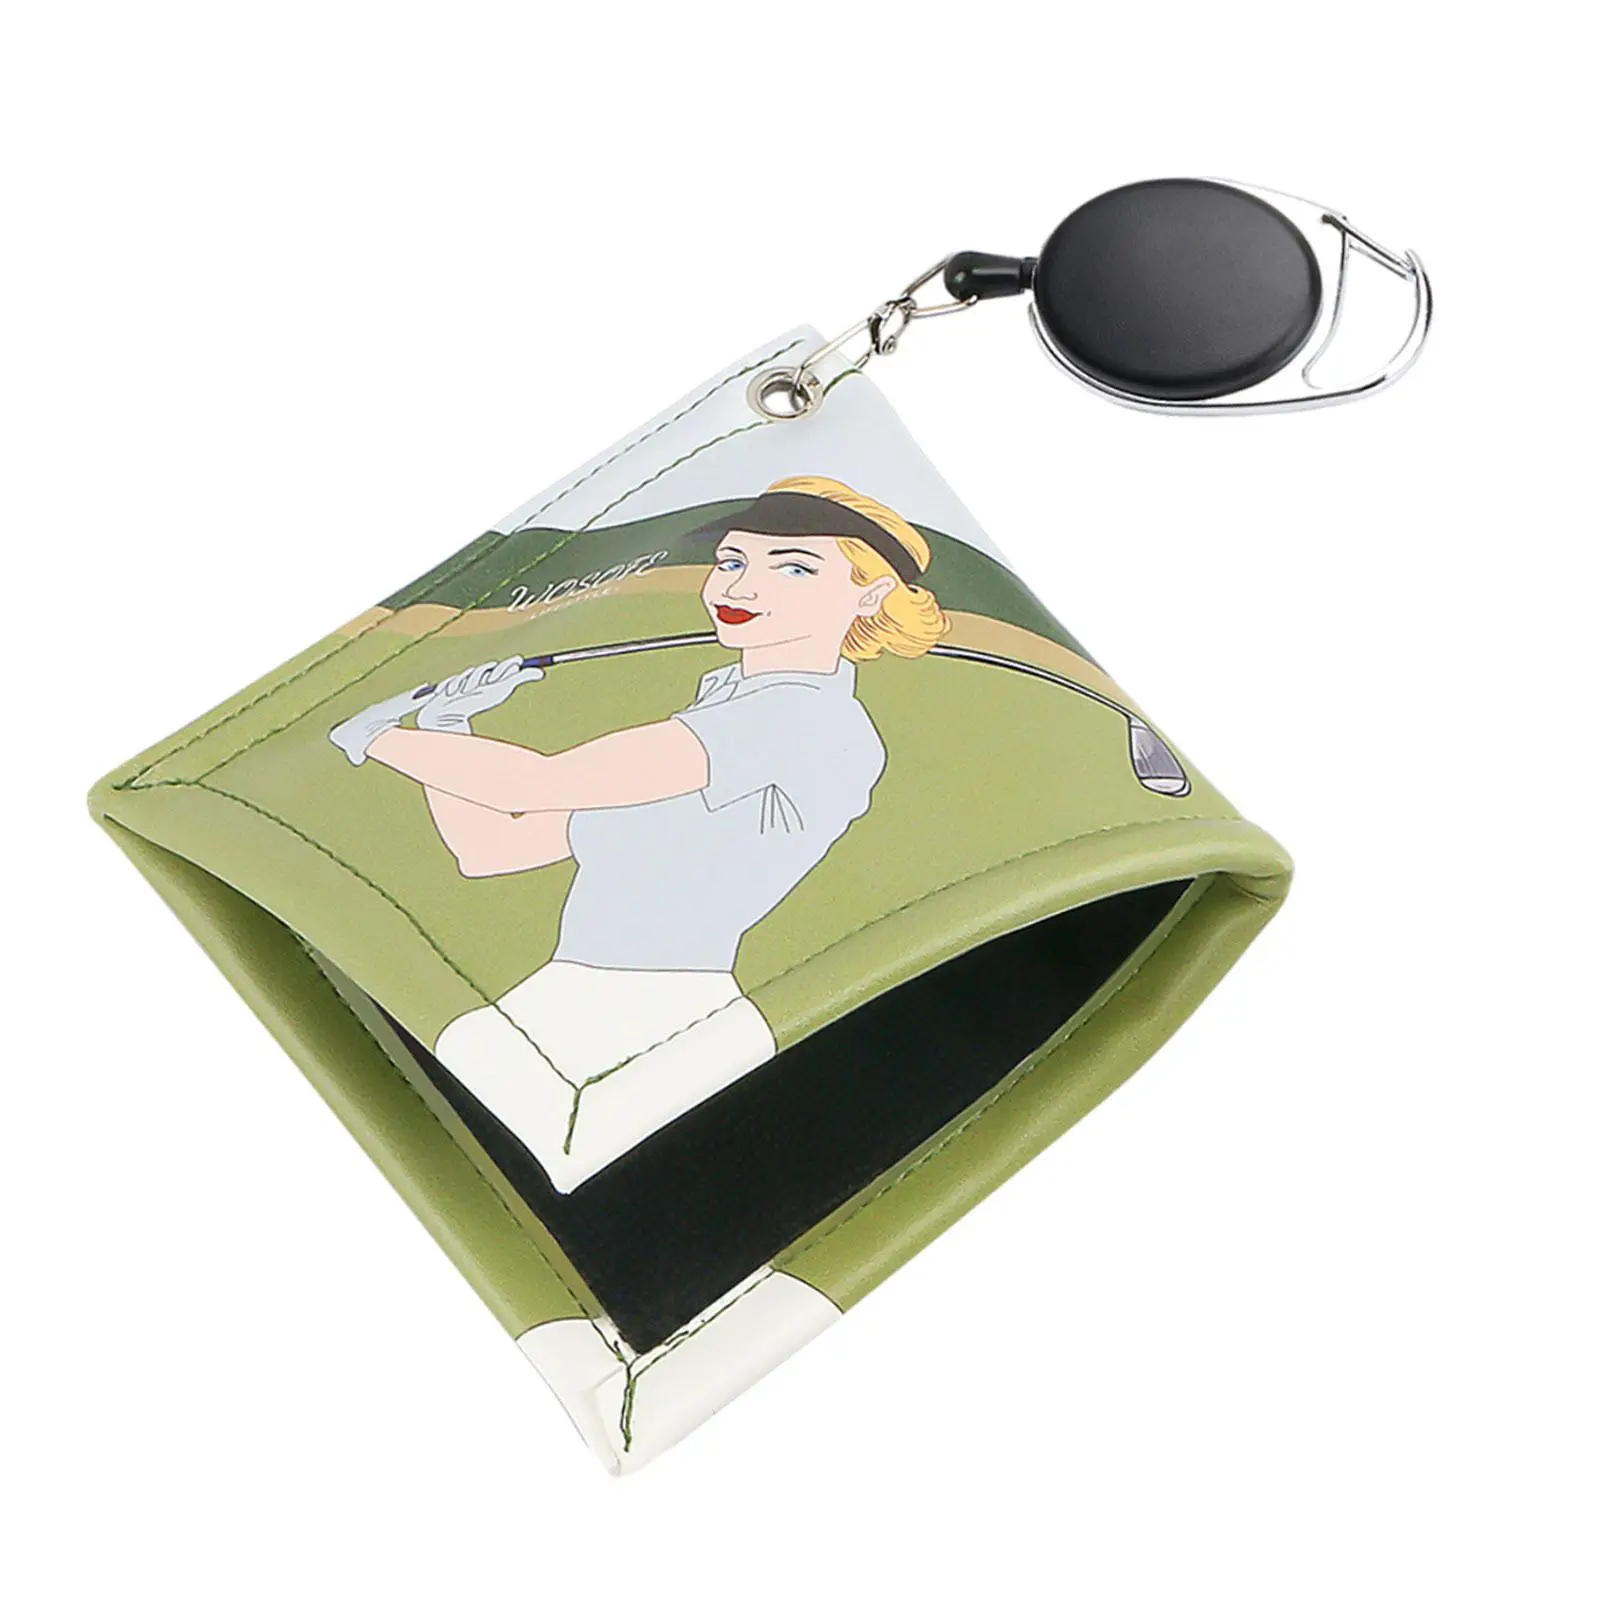 Golf Ball Towel with Retractable Keychain Buckle for Men Women 4.7 x 4.7 inch Golf Ball Cleaning Towel Golf Ball Cleaner Pocket